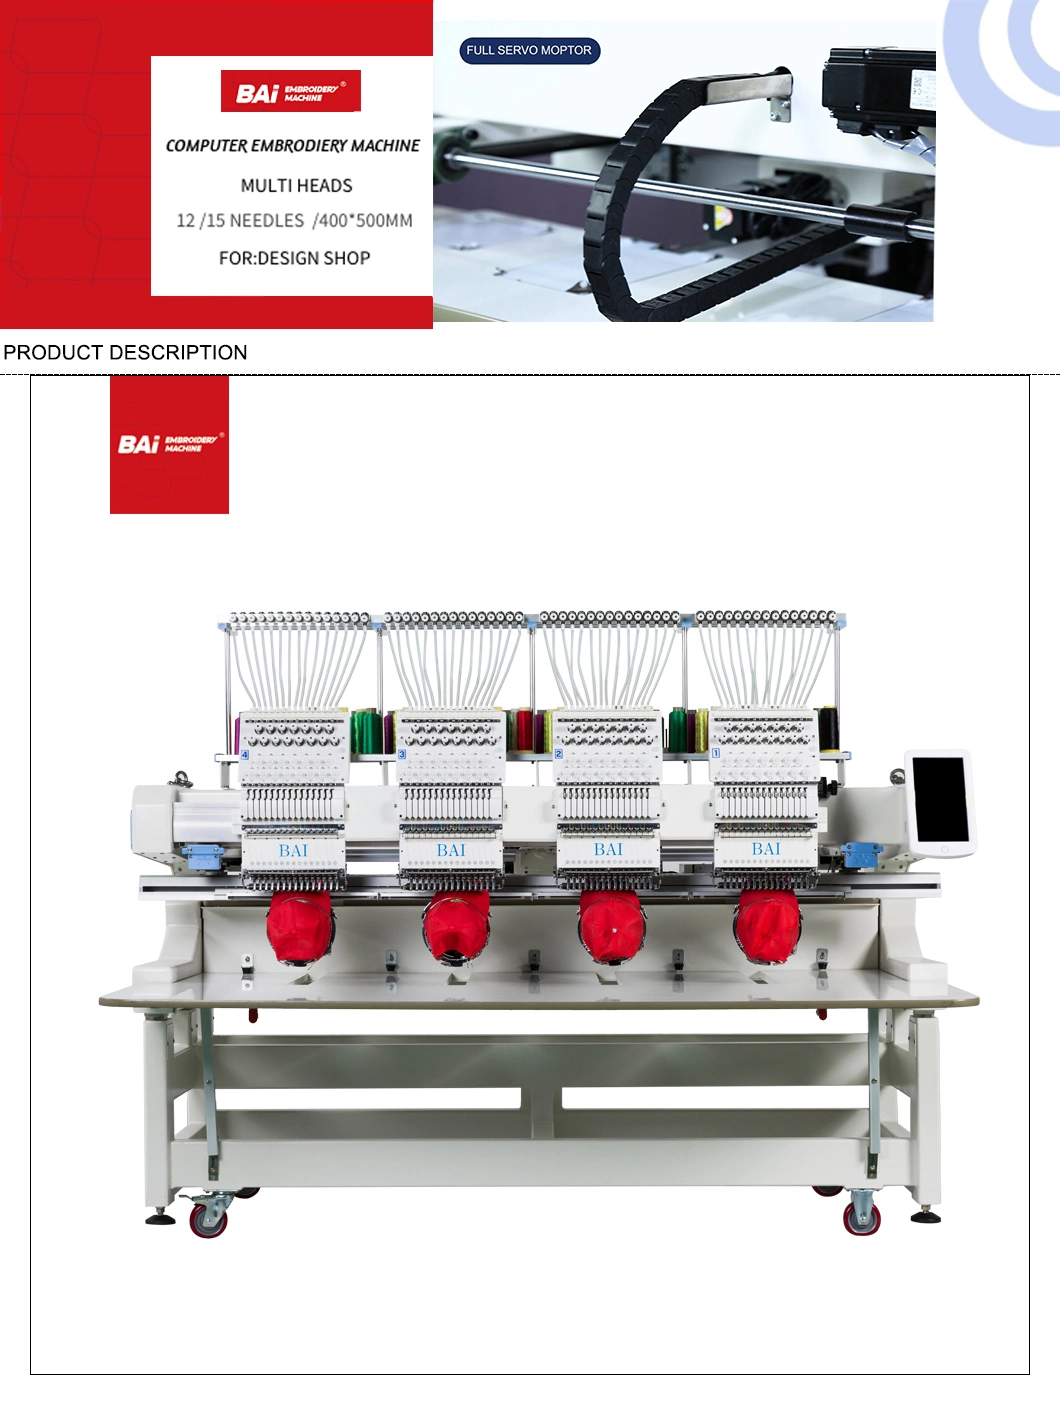 Bai Multifunctional Computerized Embroidery Machine with Intelligent Electronic Control Operation